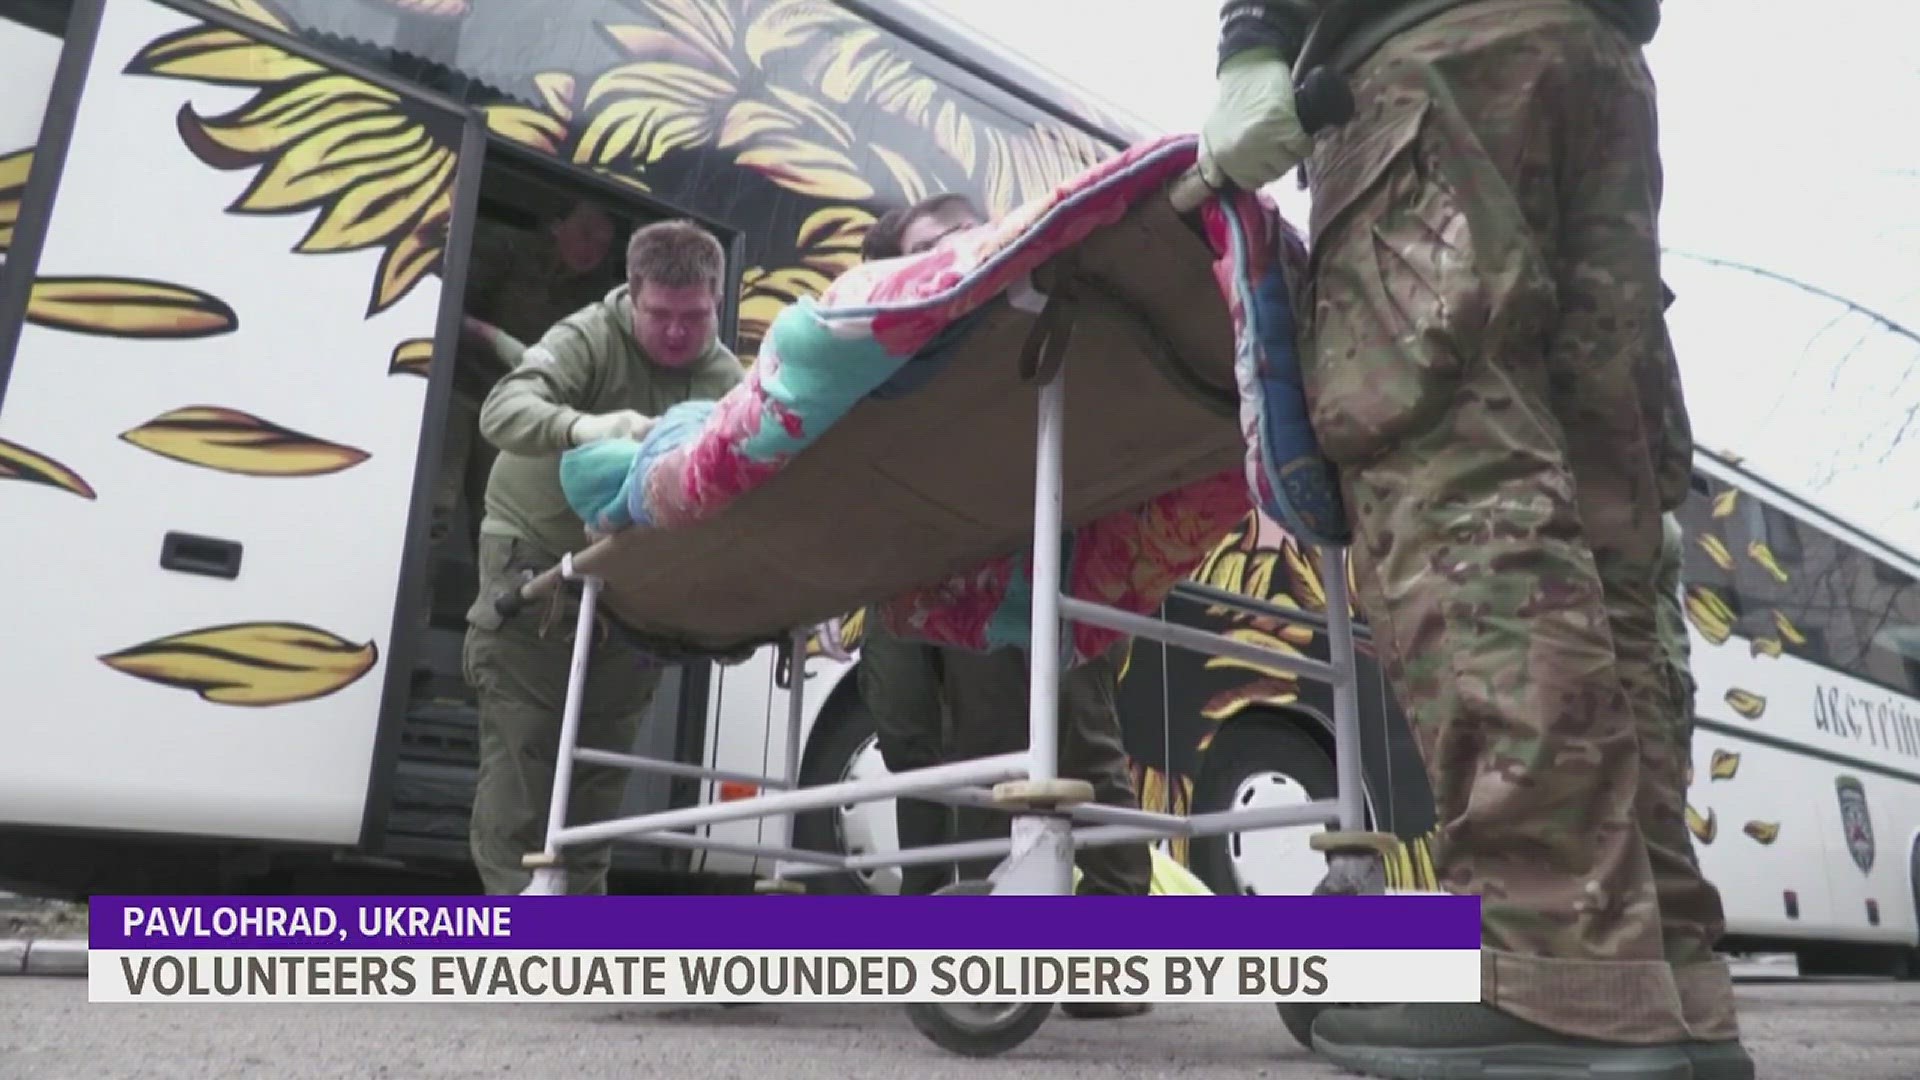 The volunteers evacuate soldiers from the front lines, spending several weeks on call and rotating shifts.